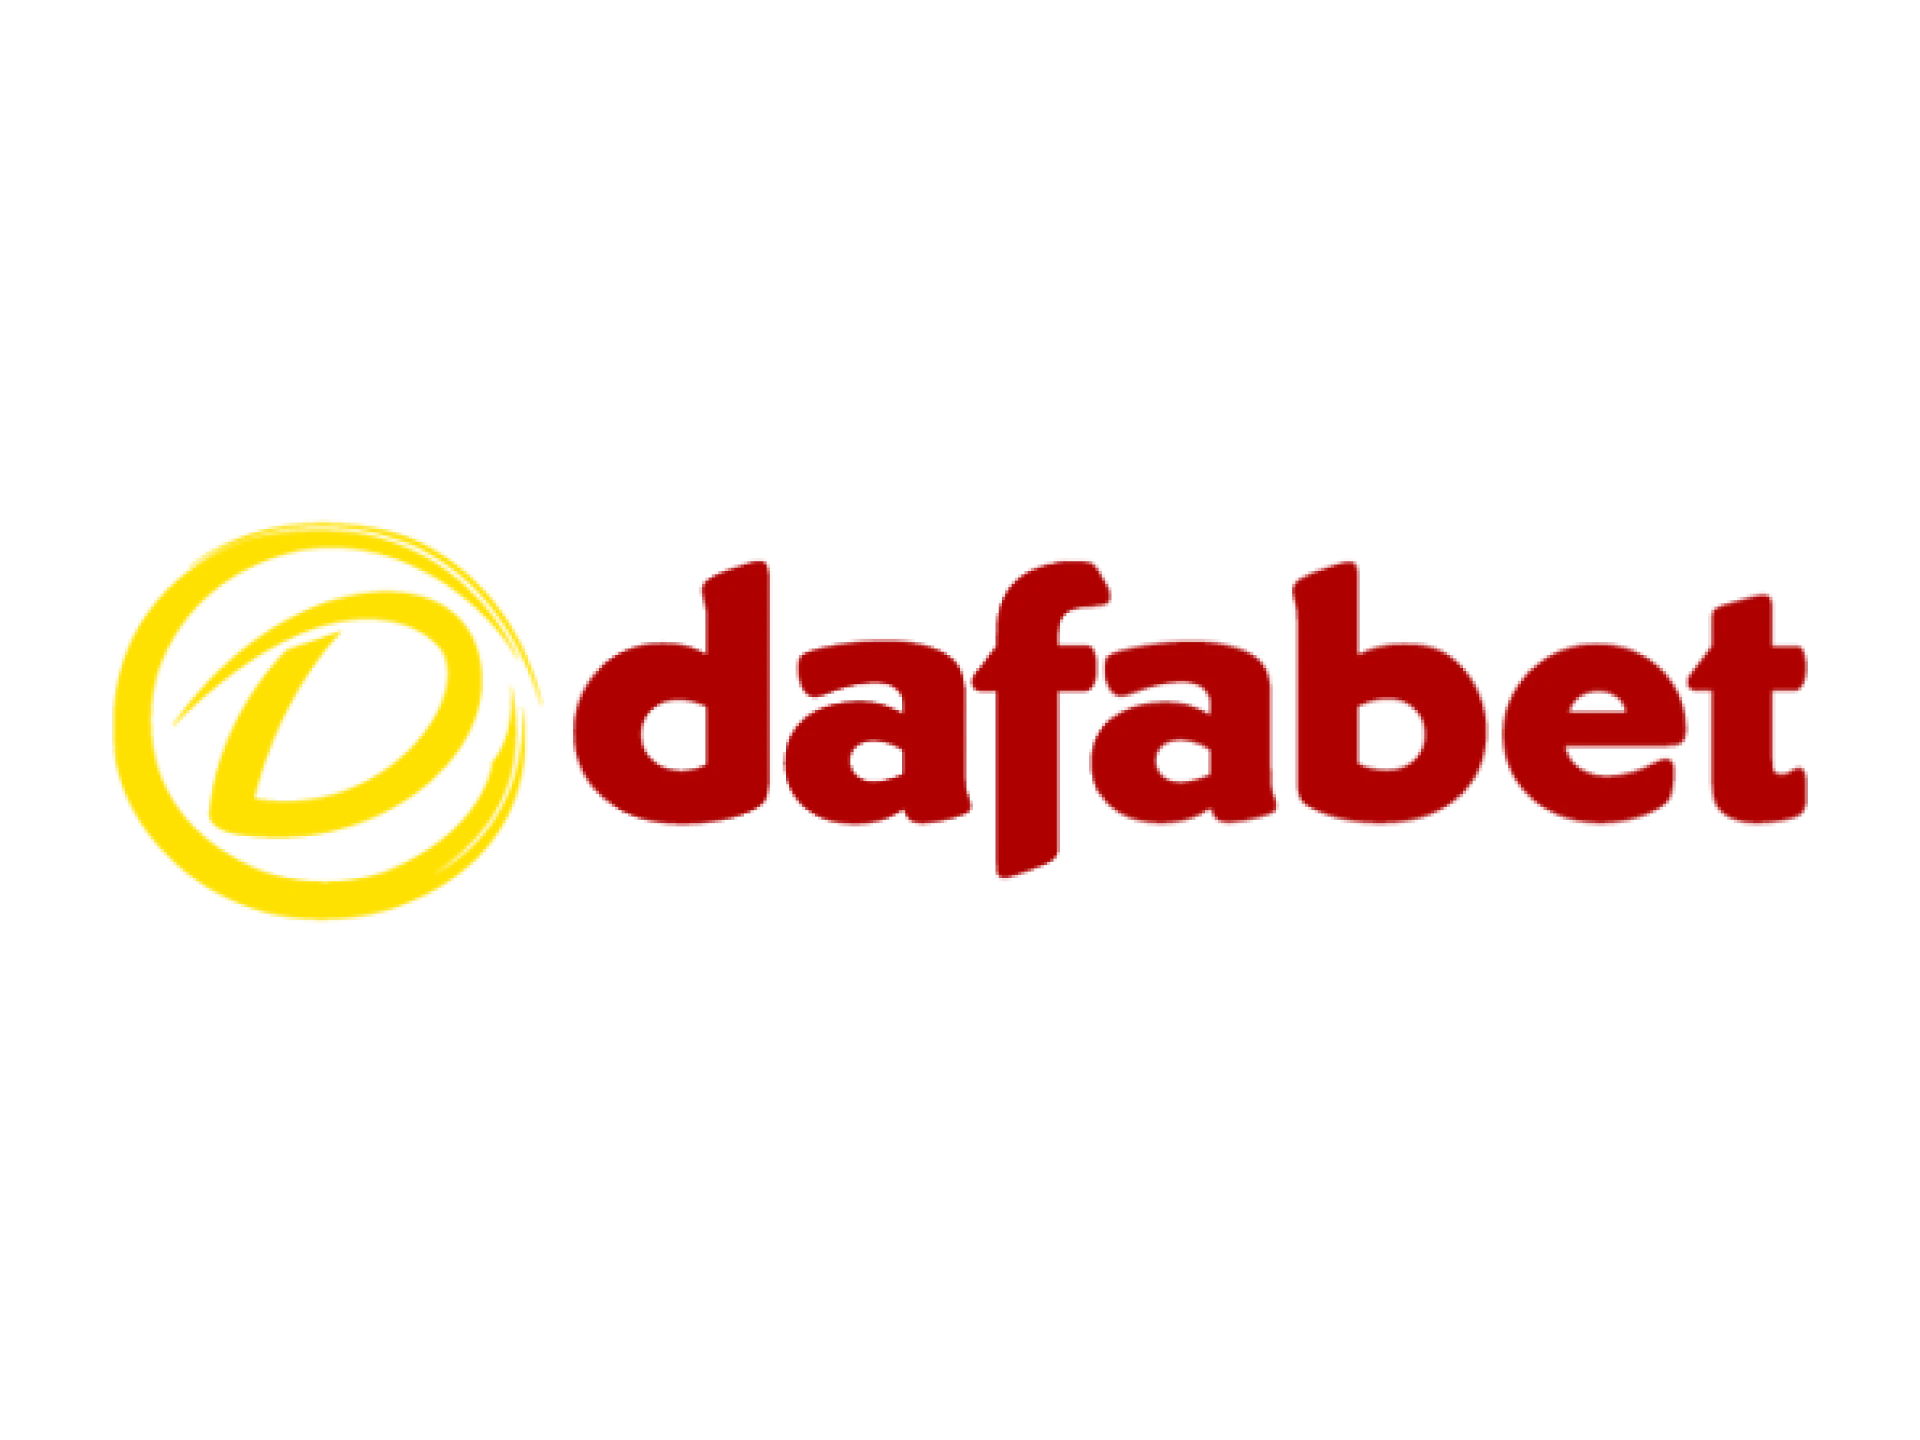 Bet on cricket with Dafabet.